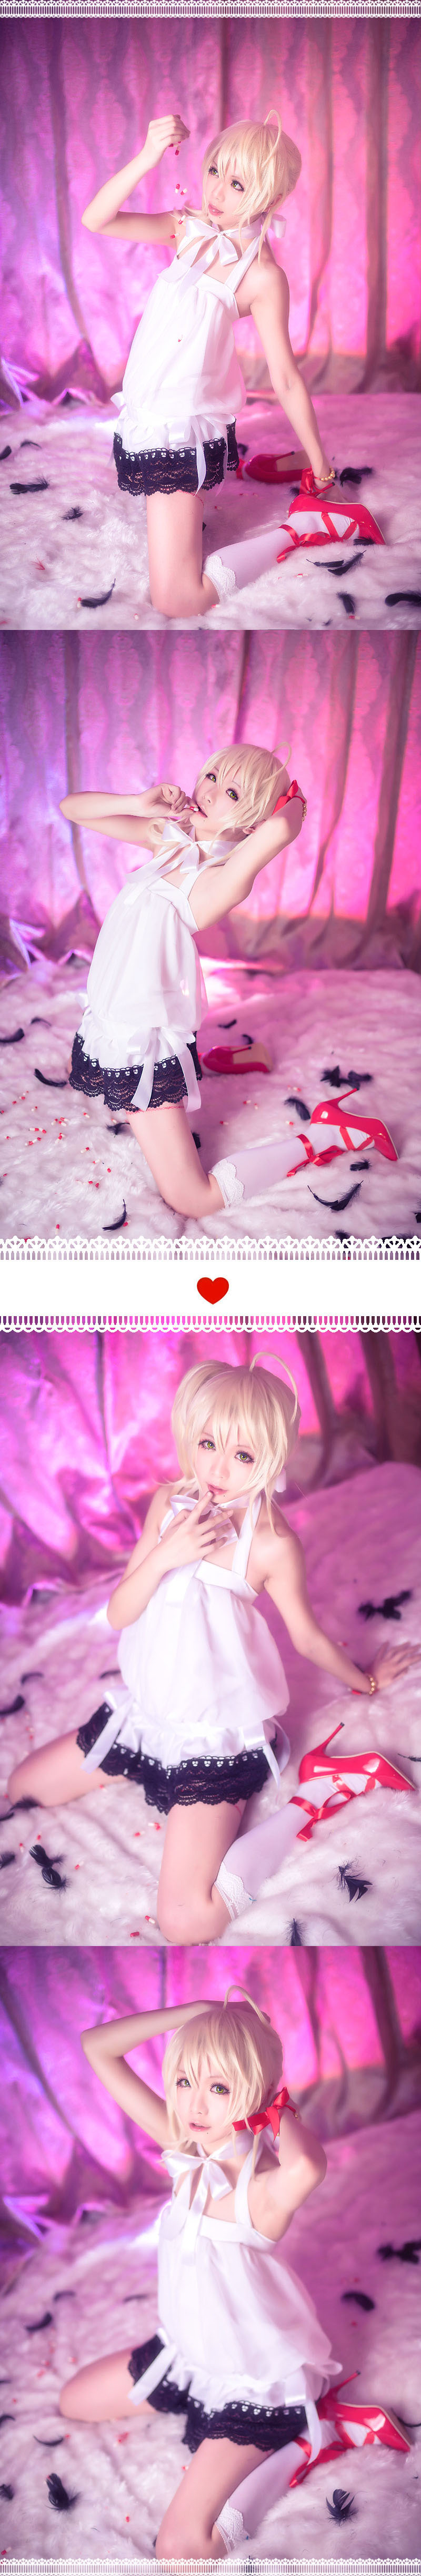 Star's Delay to December 22, Coser Hoshilly BCY Collection 8(13)